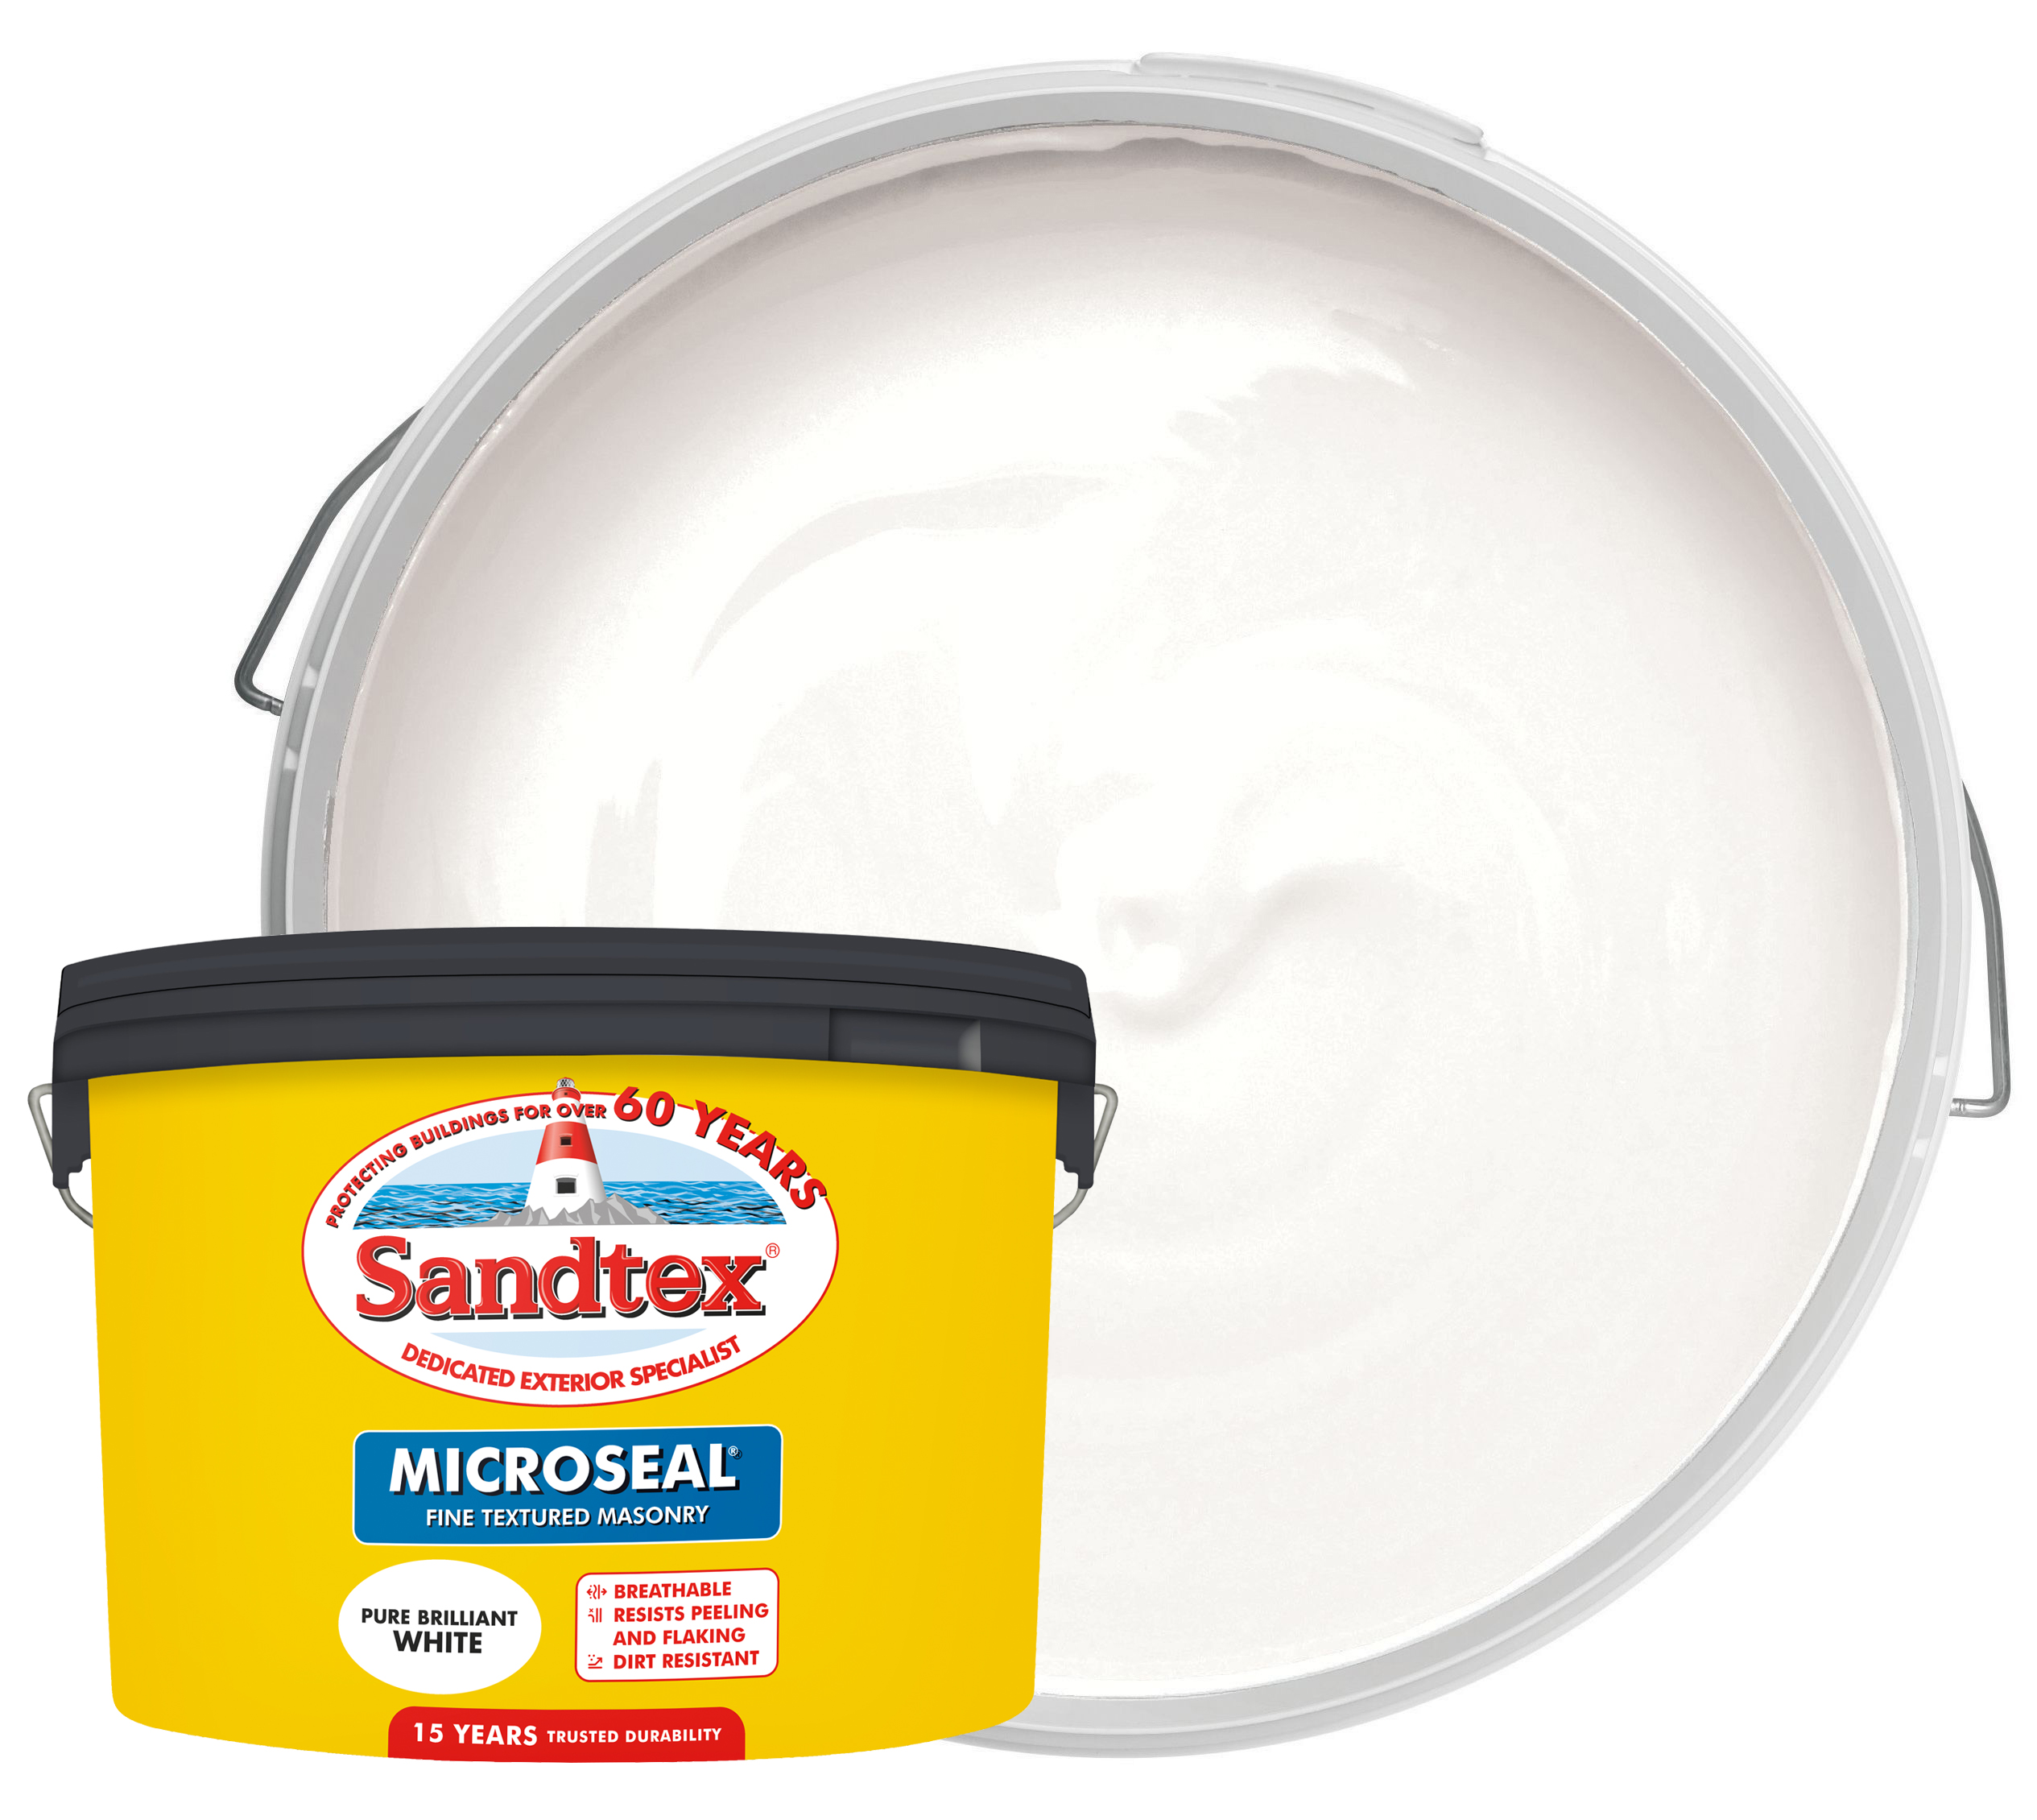 Image of Sandtex Microseal Fine Textured Weatherproof Masonry 15 Year Exterior Wall Paint - Pure Brilliant White - 10L